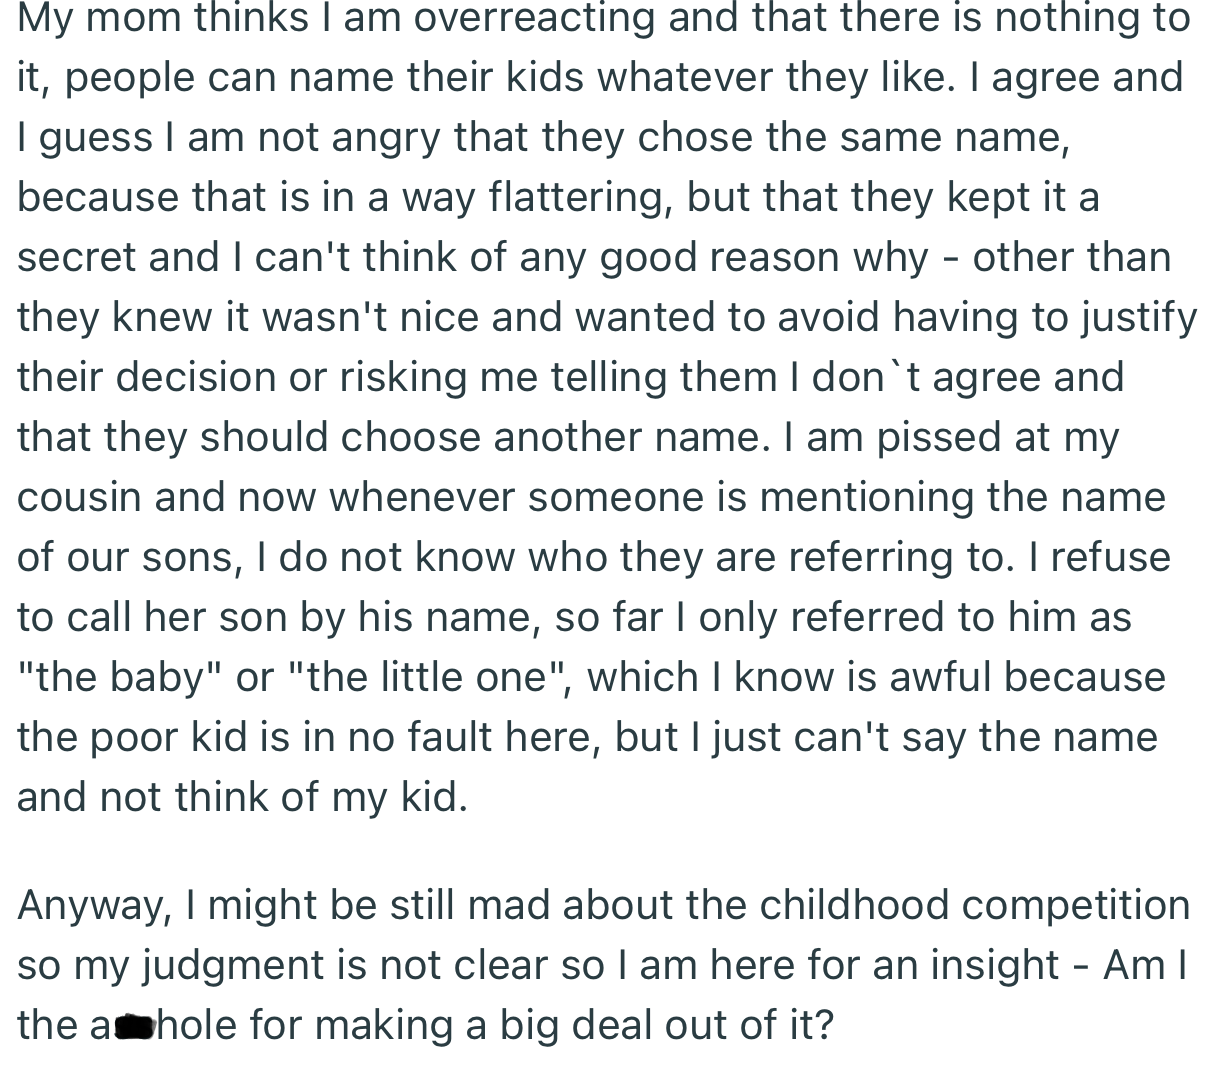 OP is furious that the couple kept the name a secret and didn’t even care to ask if she would be ok with it. Consequently, she has refused to address the newborn by that name